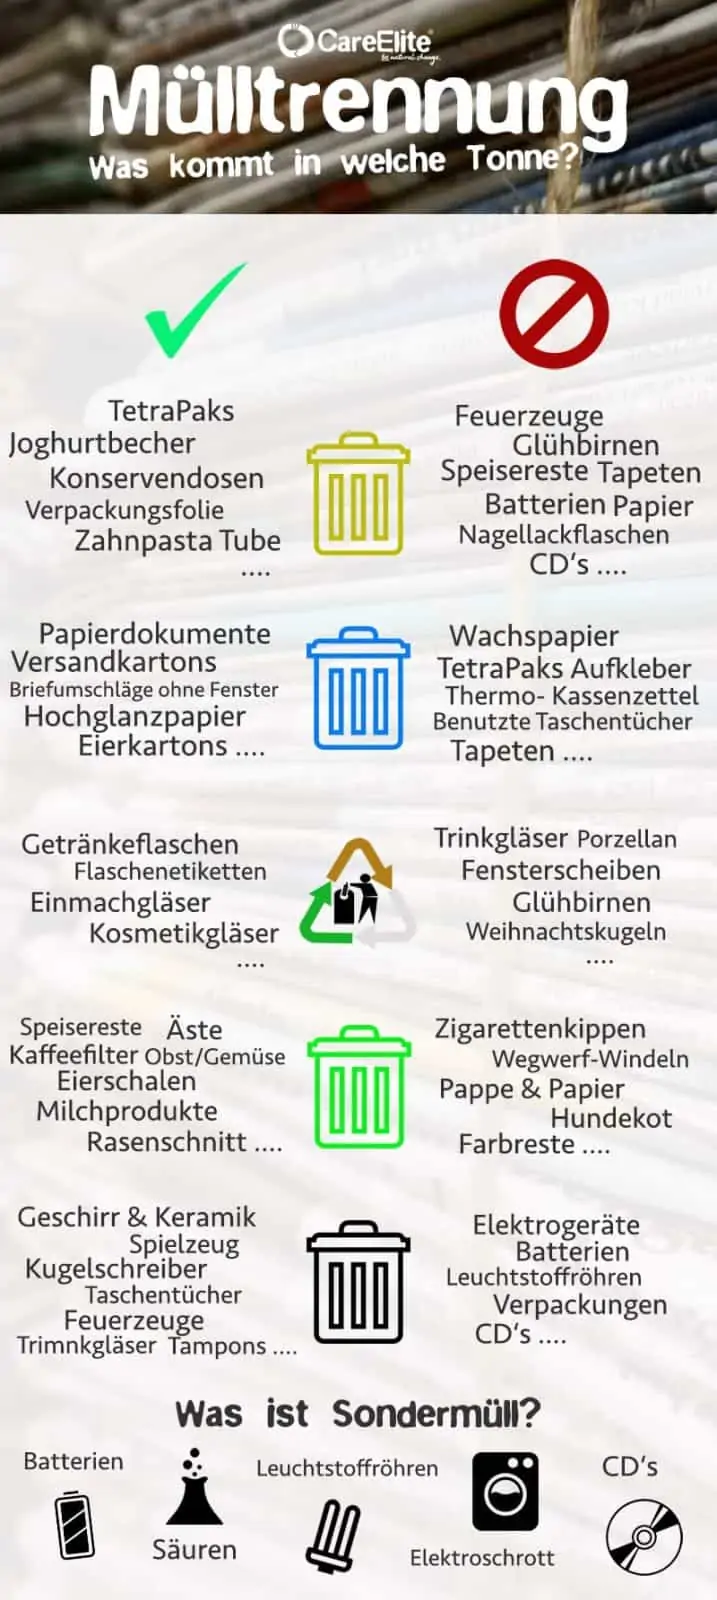 Waste separation - separate waste correctly (garbage cans)